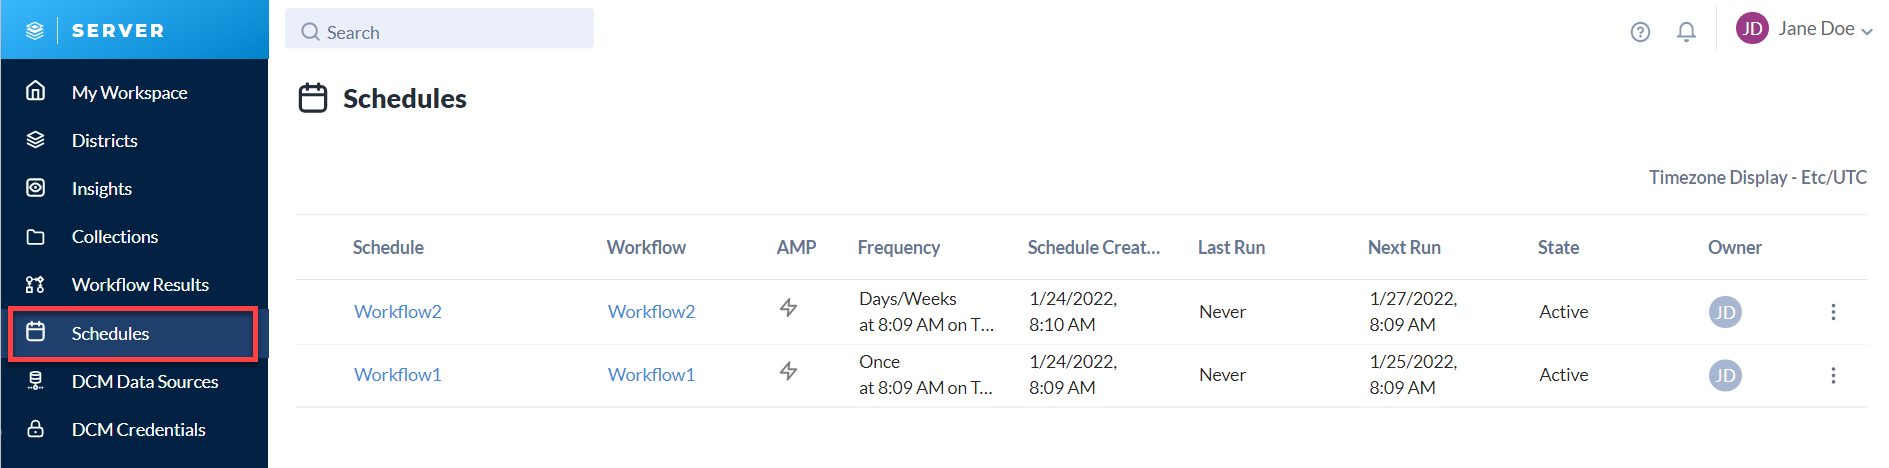 Schedules allow users to schedule workflows to run on a specified date and time or a recurring basis.